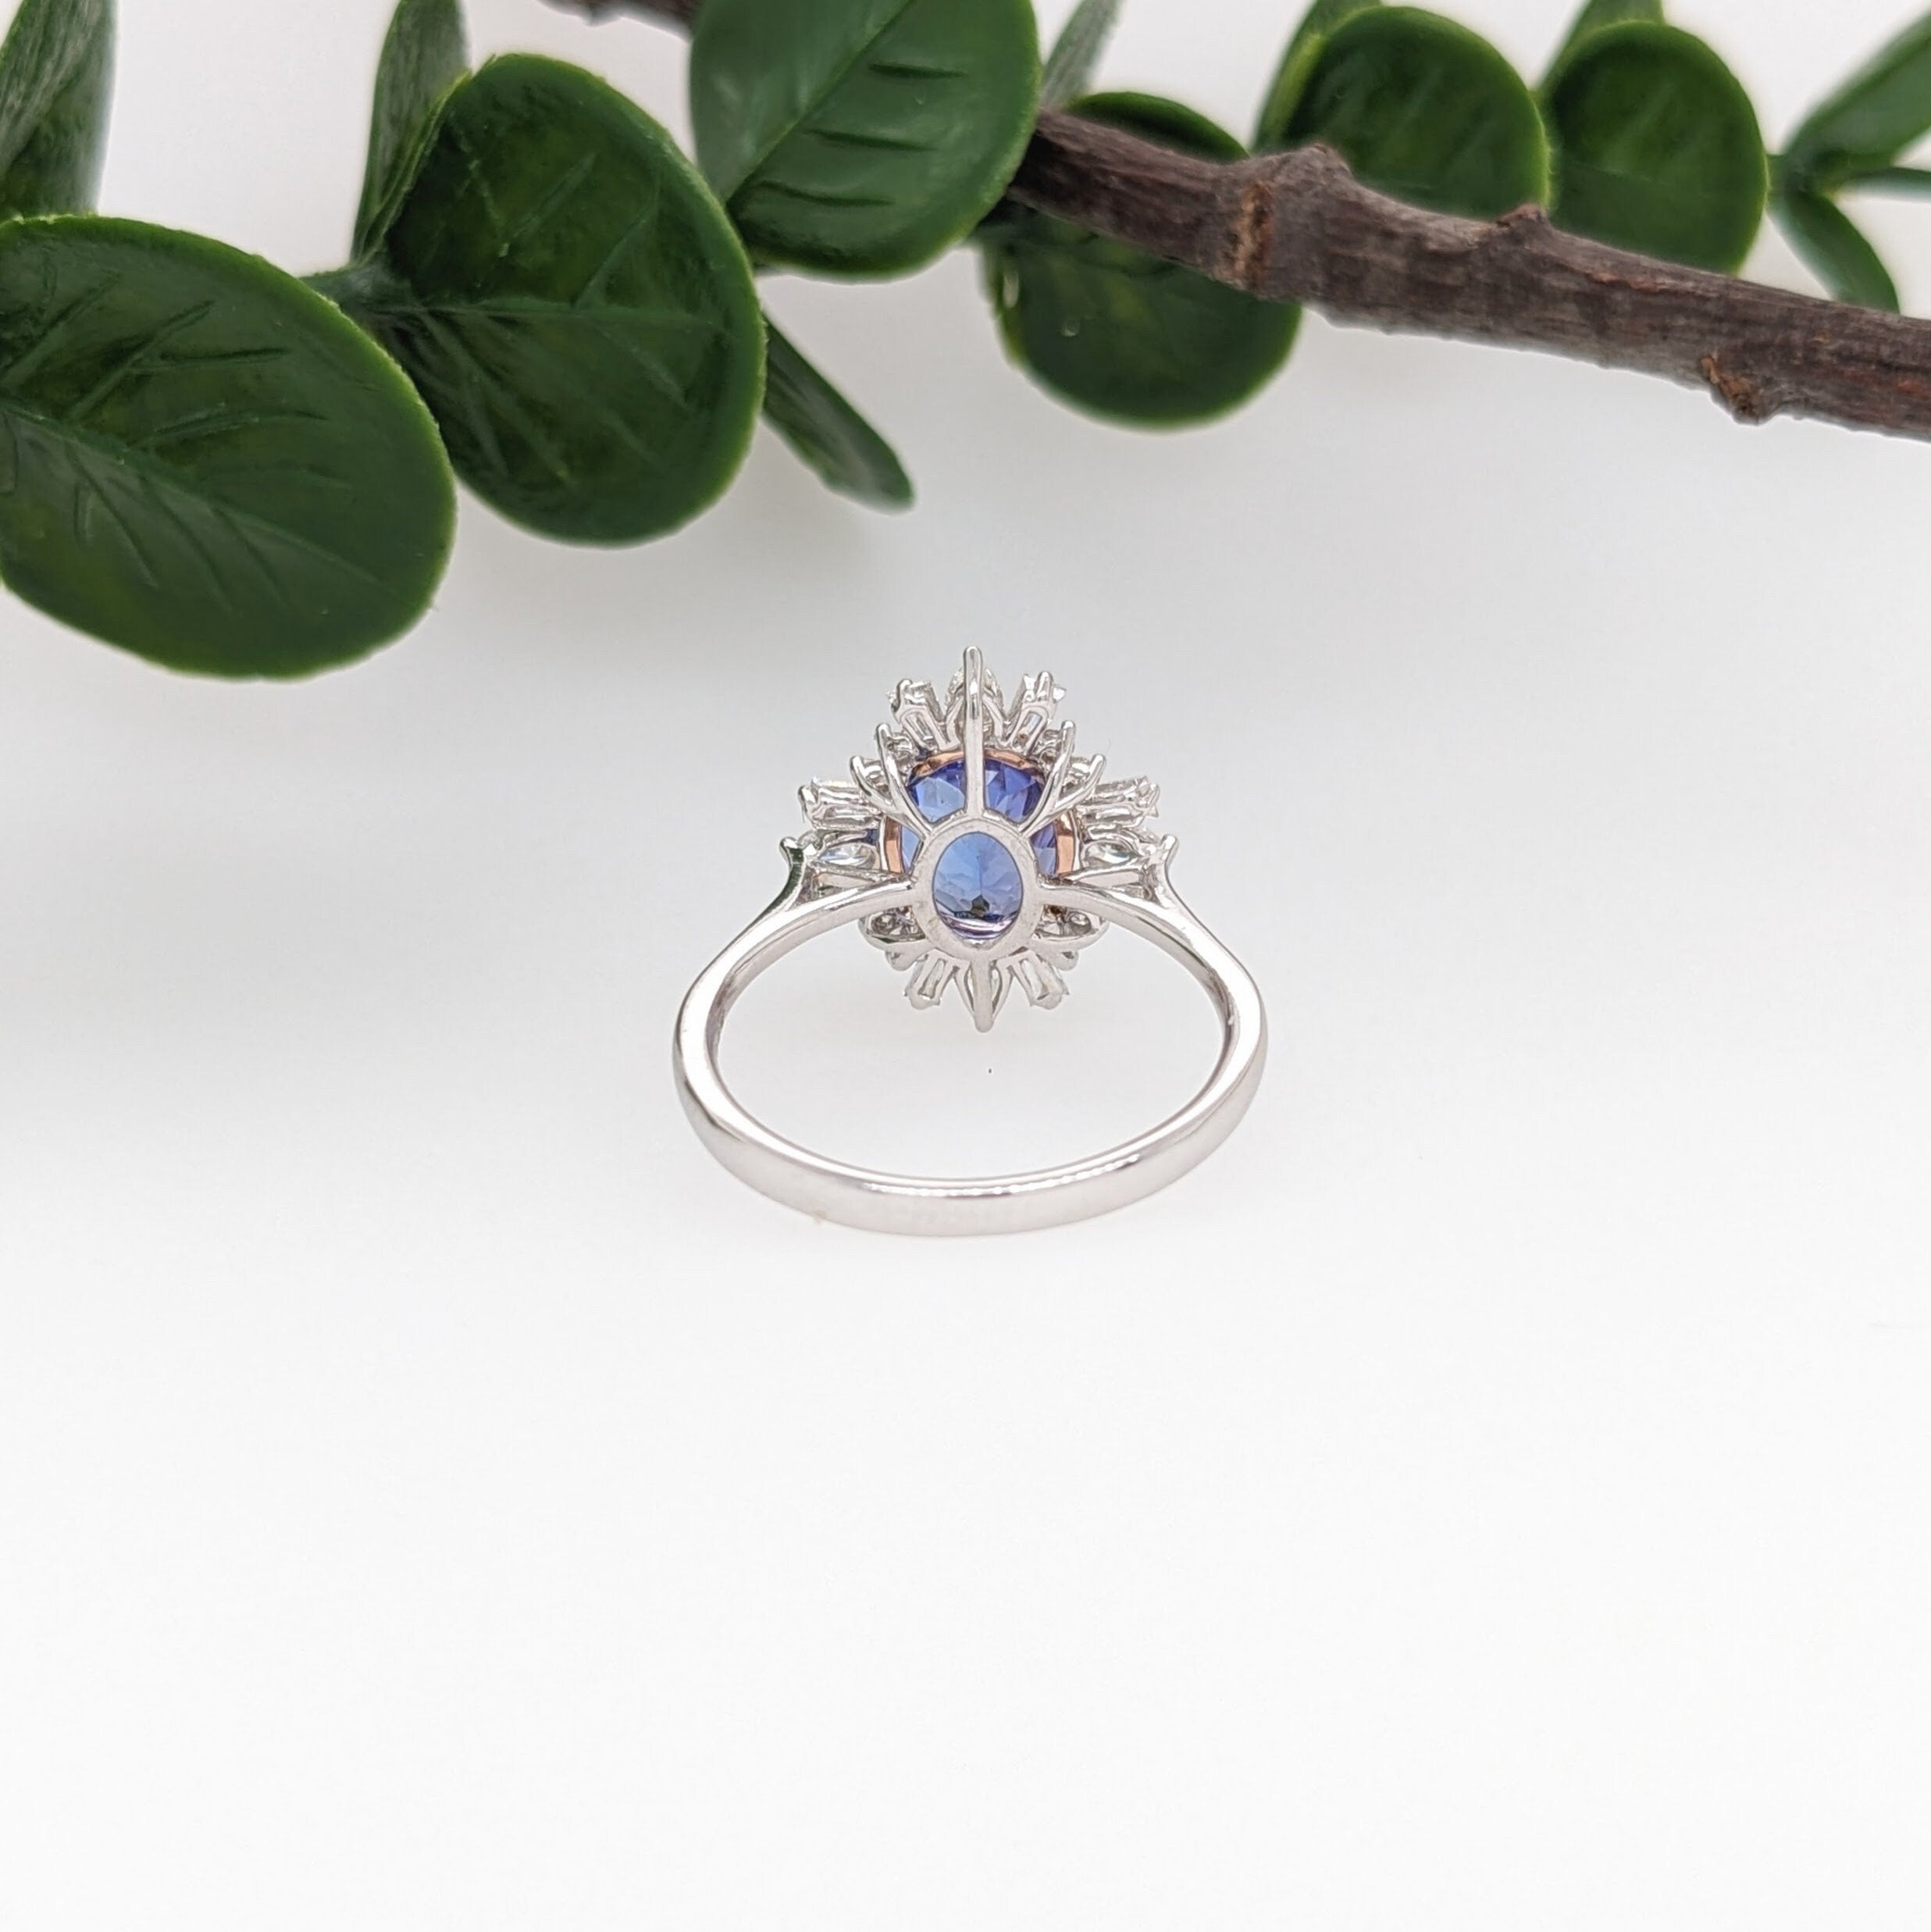 Gorgeous Tanzanite Sunburst Ring in 14K Solid White and Rose Gold w Natural Diamond Accents | Oval 9x7mm | December Birthstone Ring